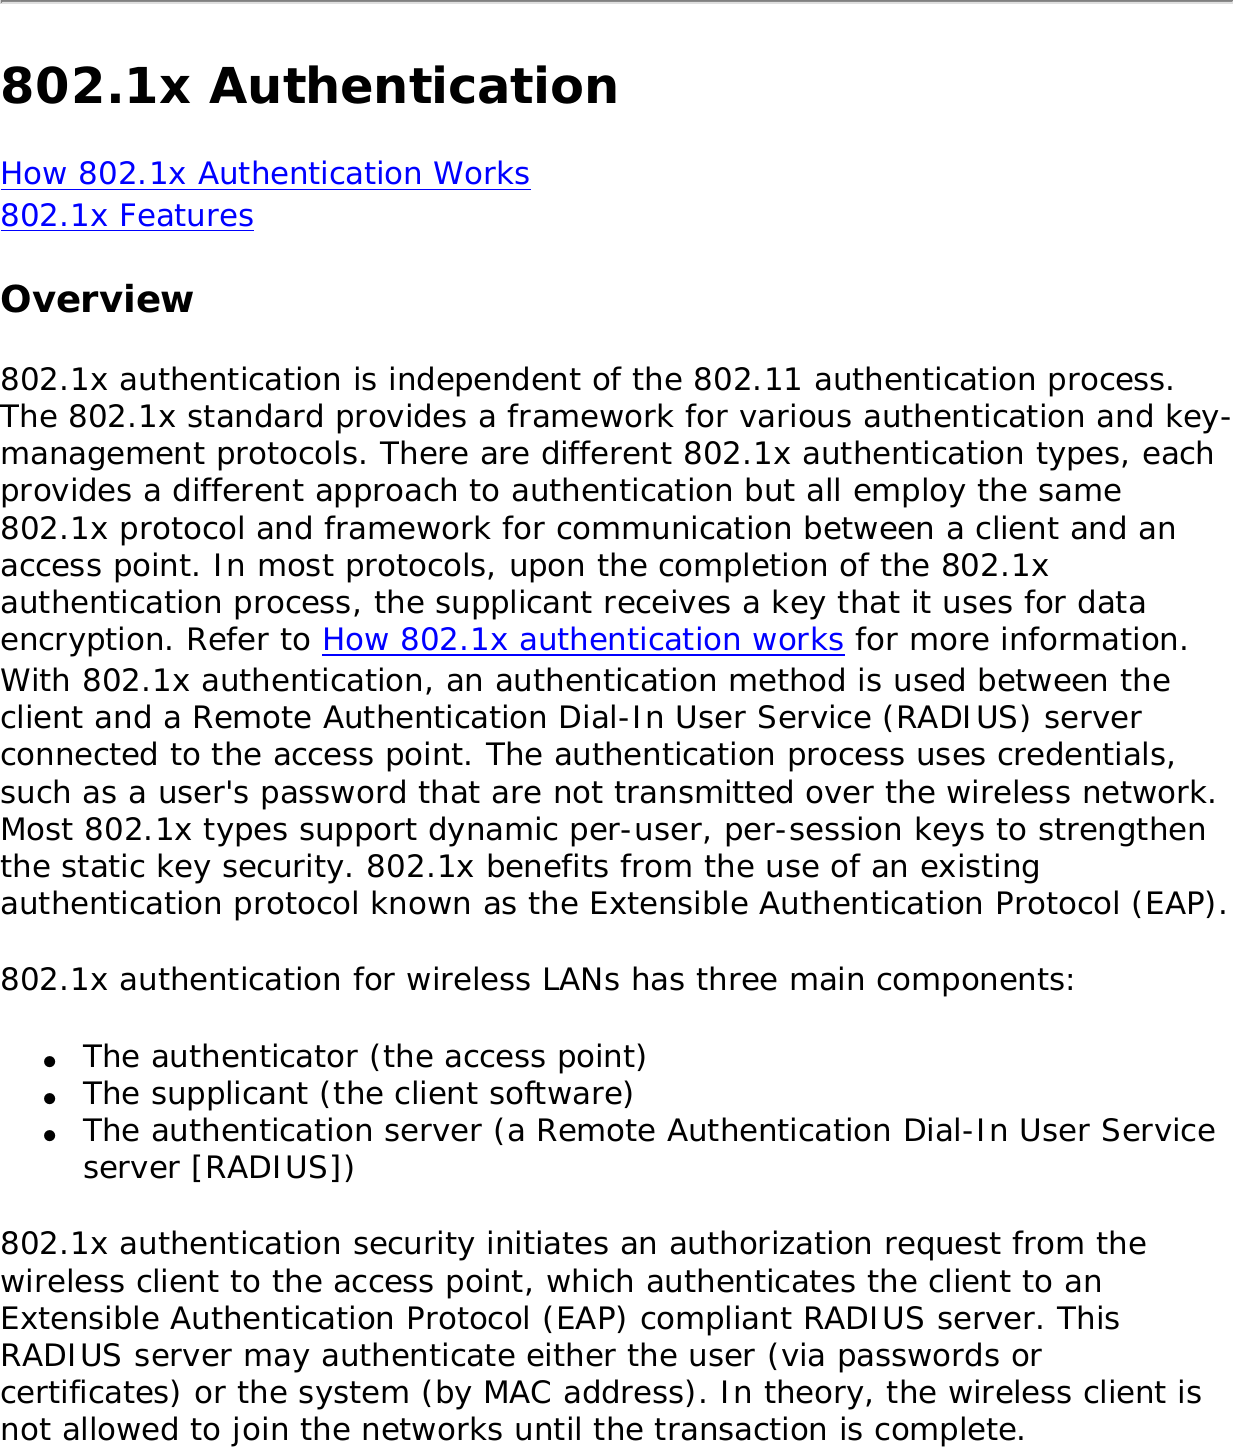 802.1x AuthenticationHow 802.1x Authentication Works802.1x Features Overview802.1x authentication is independent of the 802.11 authentication process. The 802.1x standard provides a framework for various authentication and key-management protocols. There are different 802.1x authentication types, each provides a different approach to authentication but all employ the same 802.1x protocol and framework for communication between a client and an access point. In most protocols, upon the completion of the 802.1x authentication process, the supplicant receives a key that it uses for data encryption. Refer to How 802.1x authentication works for more information. With 802.1x authentication, an authentication method is used between the client and a Remote Authentication Dial-In User Service (RADIUS) server connected to the access point. The authentication process uses credentials, such as a user&apos;s password that are not transmitted over the wireless network. Most 802.1x types support dynamic per-user, per-session keys to strengthen the static key security. 802.1x benefits from the use of an existing authentication protocol known as the Extensible Authentication Protocol (EAP). 802.1x authentication for wireless LANs has three main components: ●     The authenticator (the access point)●     The supplicant (the client software)●     The authentication server (a Remote Authentication Dial-In User Service server [RADIUS])802.1x authentication security initiates an authorization request from the wireless client to the access point, which authenticates the client to an Extensible Authentication Protocol (EAP) compliant RADIUS server. This RADIUS server may authenticate either the user (via passwords or certificates) or the system (by MAC address). In theory, the wireless client is not allowed to join the networks until the transaction is complete. 